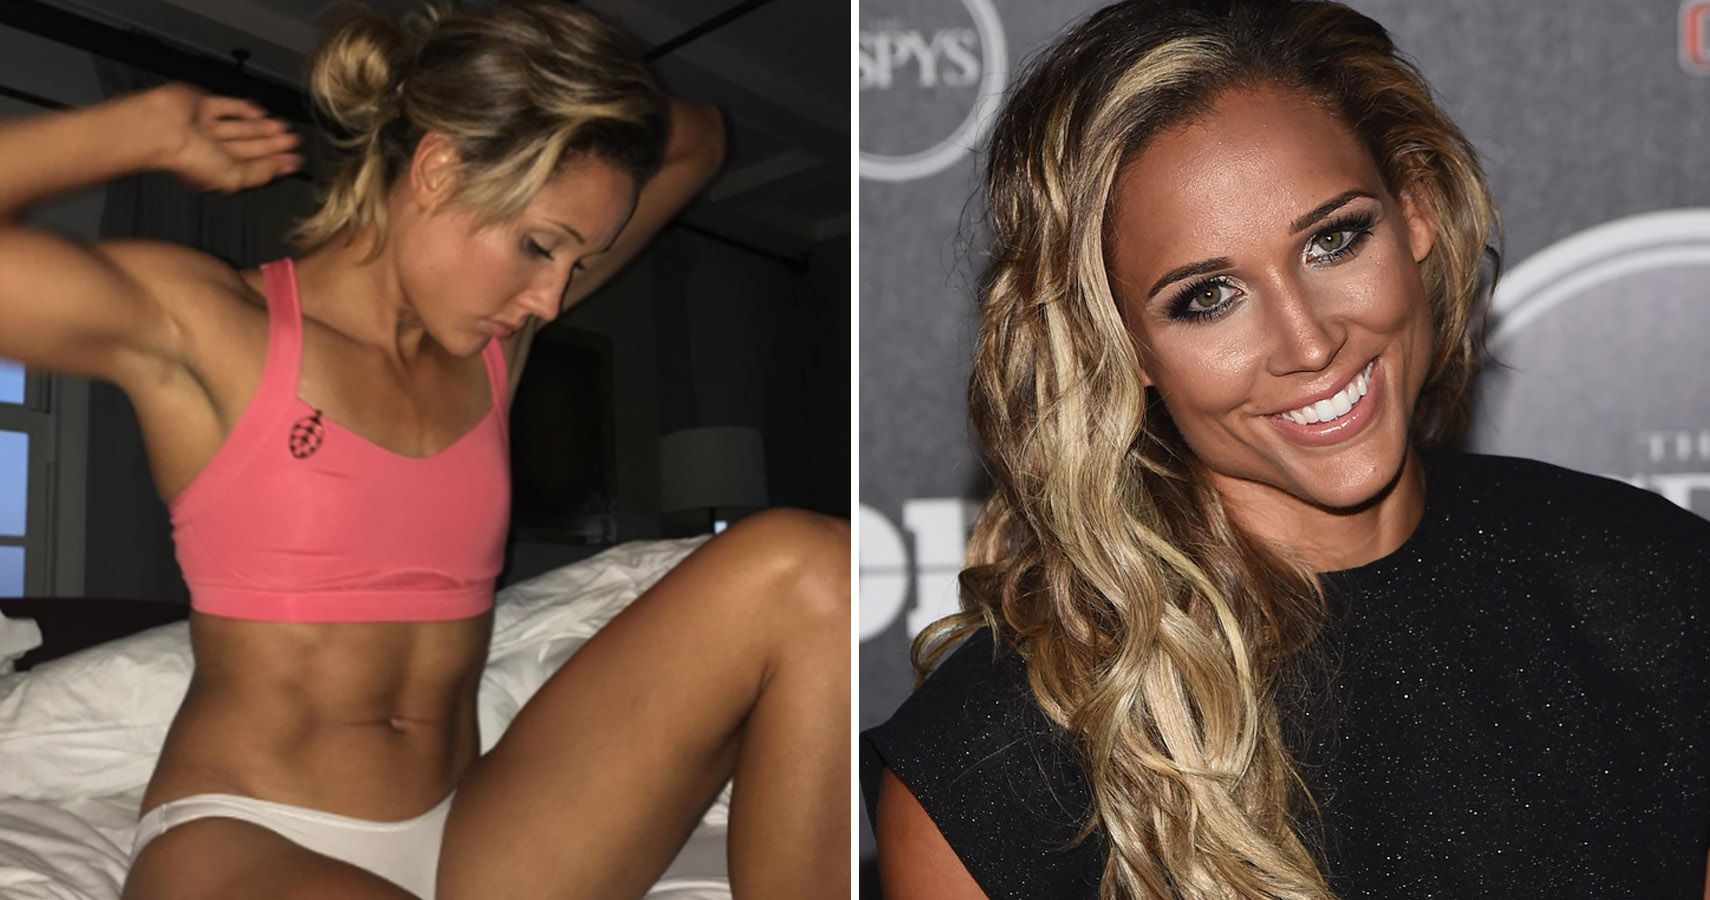 15 Pictures Of Lolo Jones That Prove She Is Hot AF.